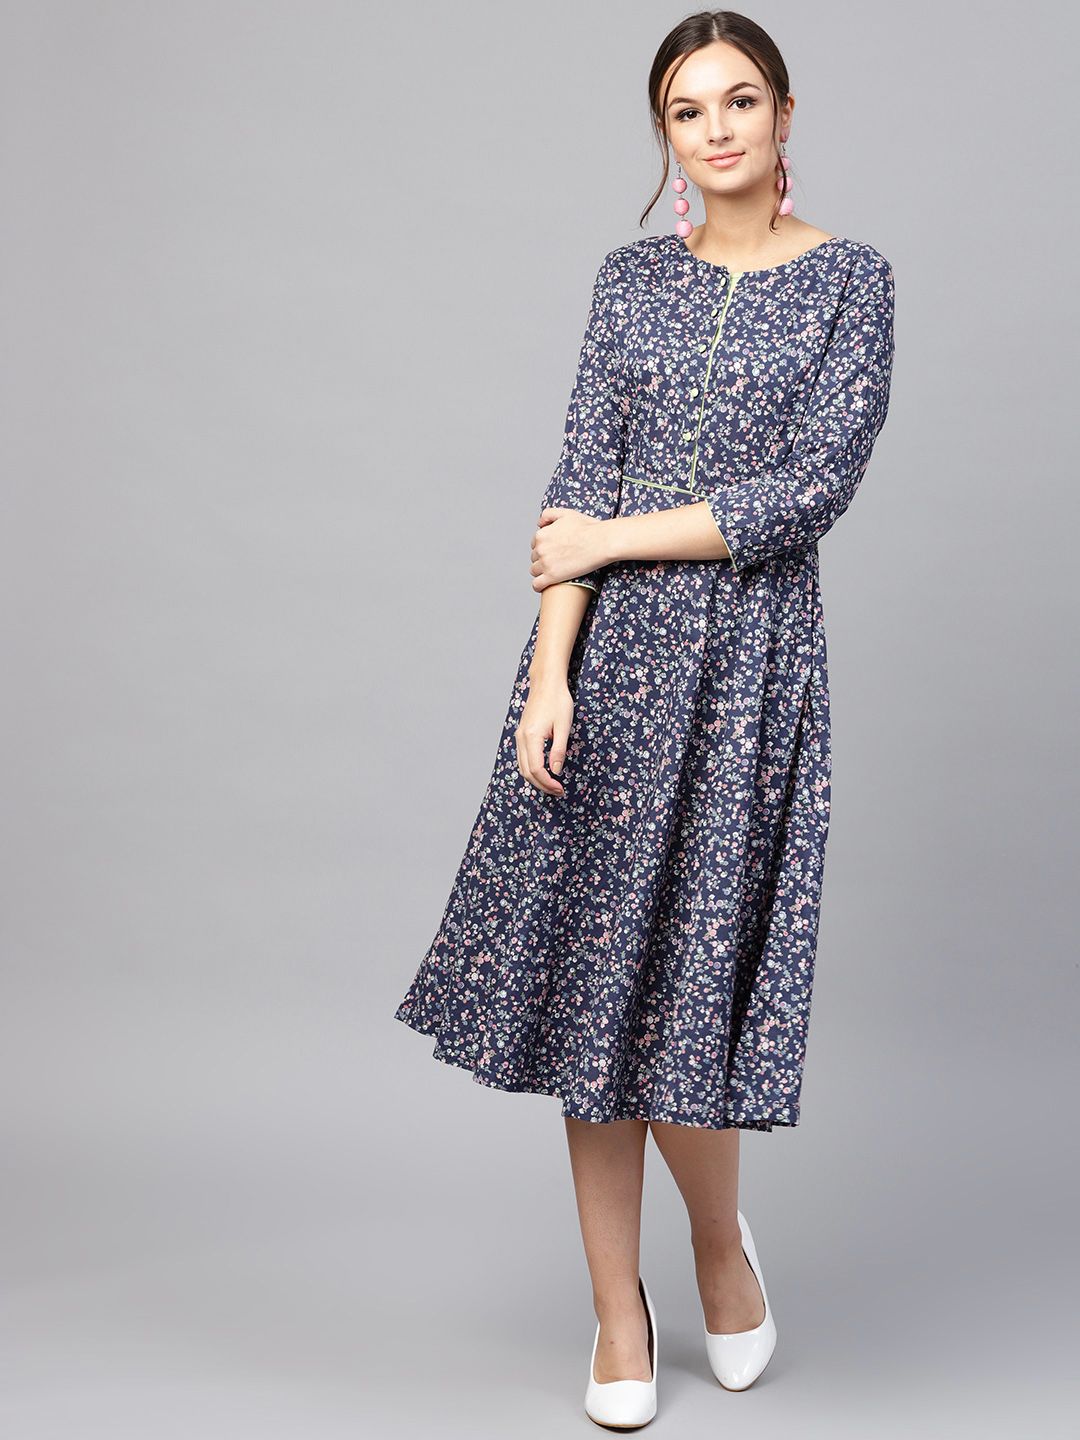 SASSAFRAS Navy Blue & Pink Floral Printed Cotton Fit and Flare Dress Price in India